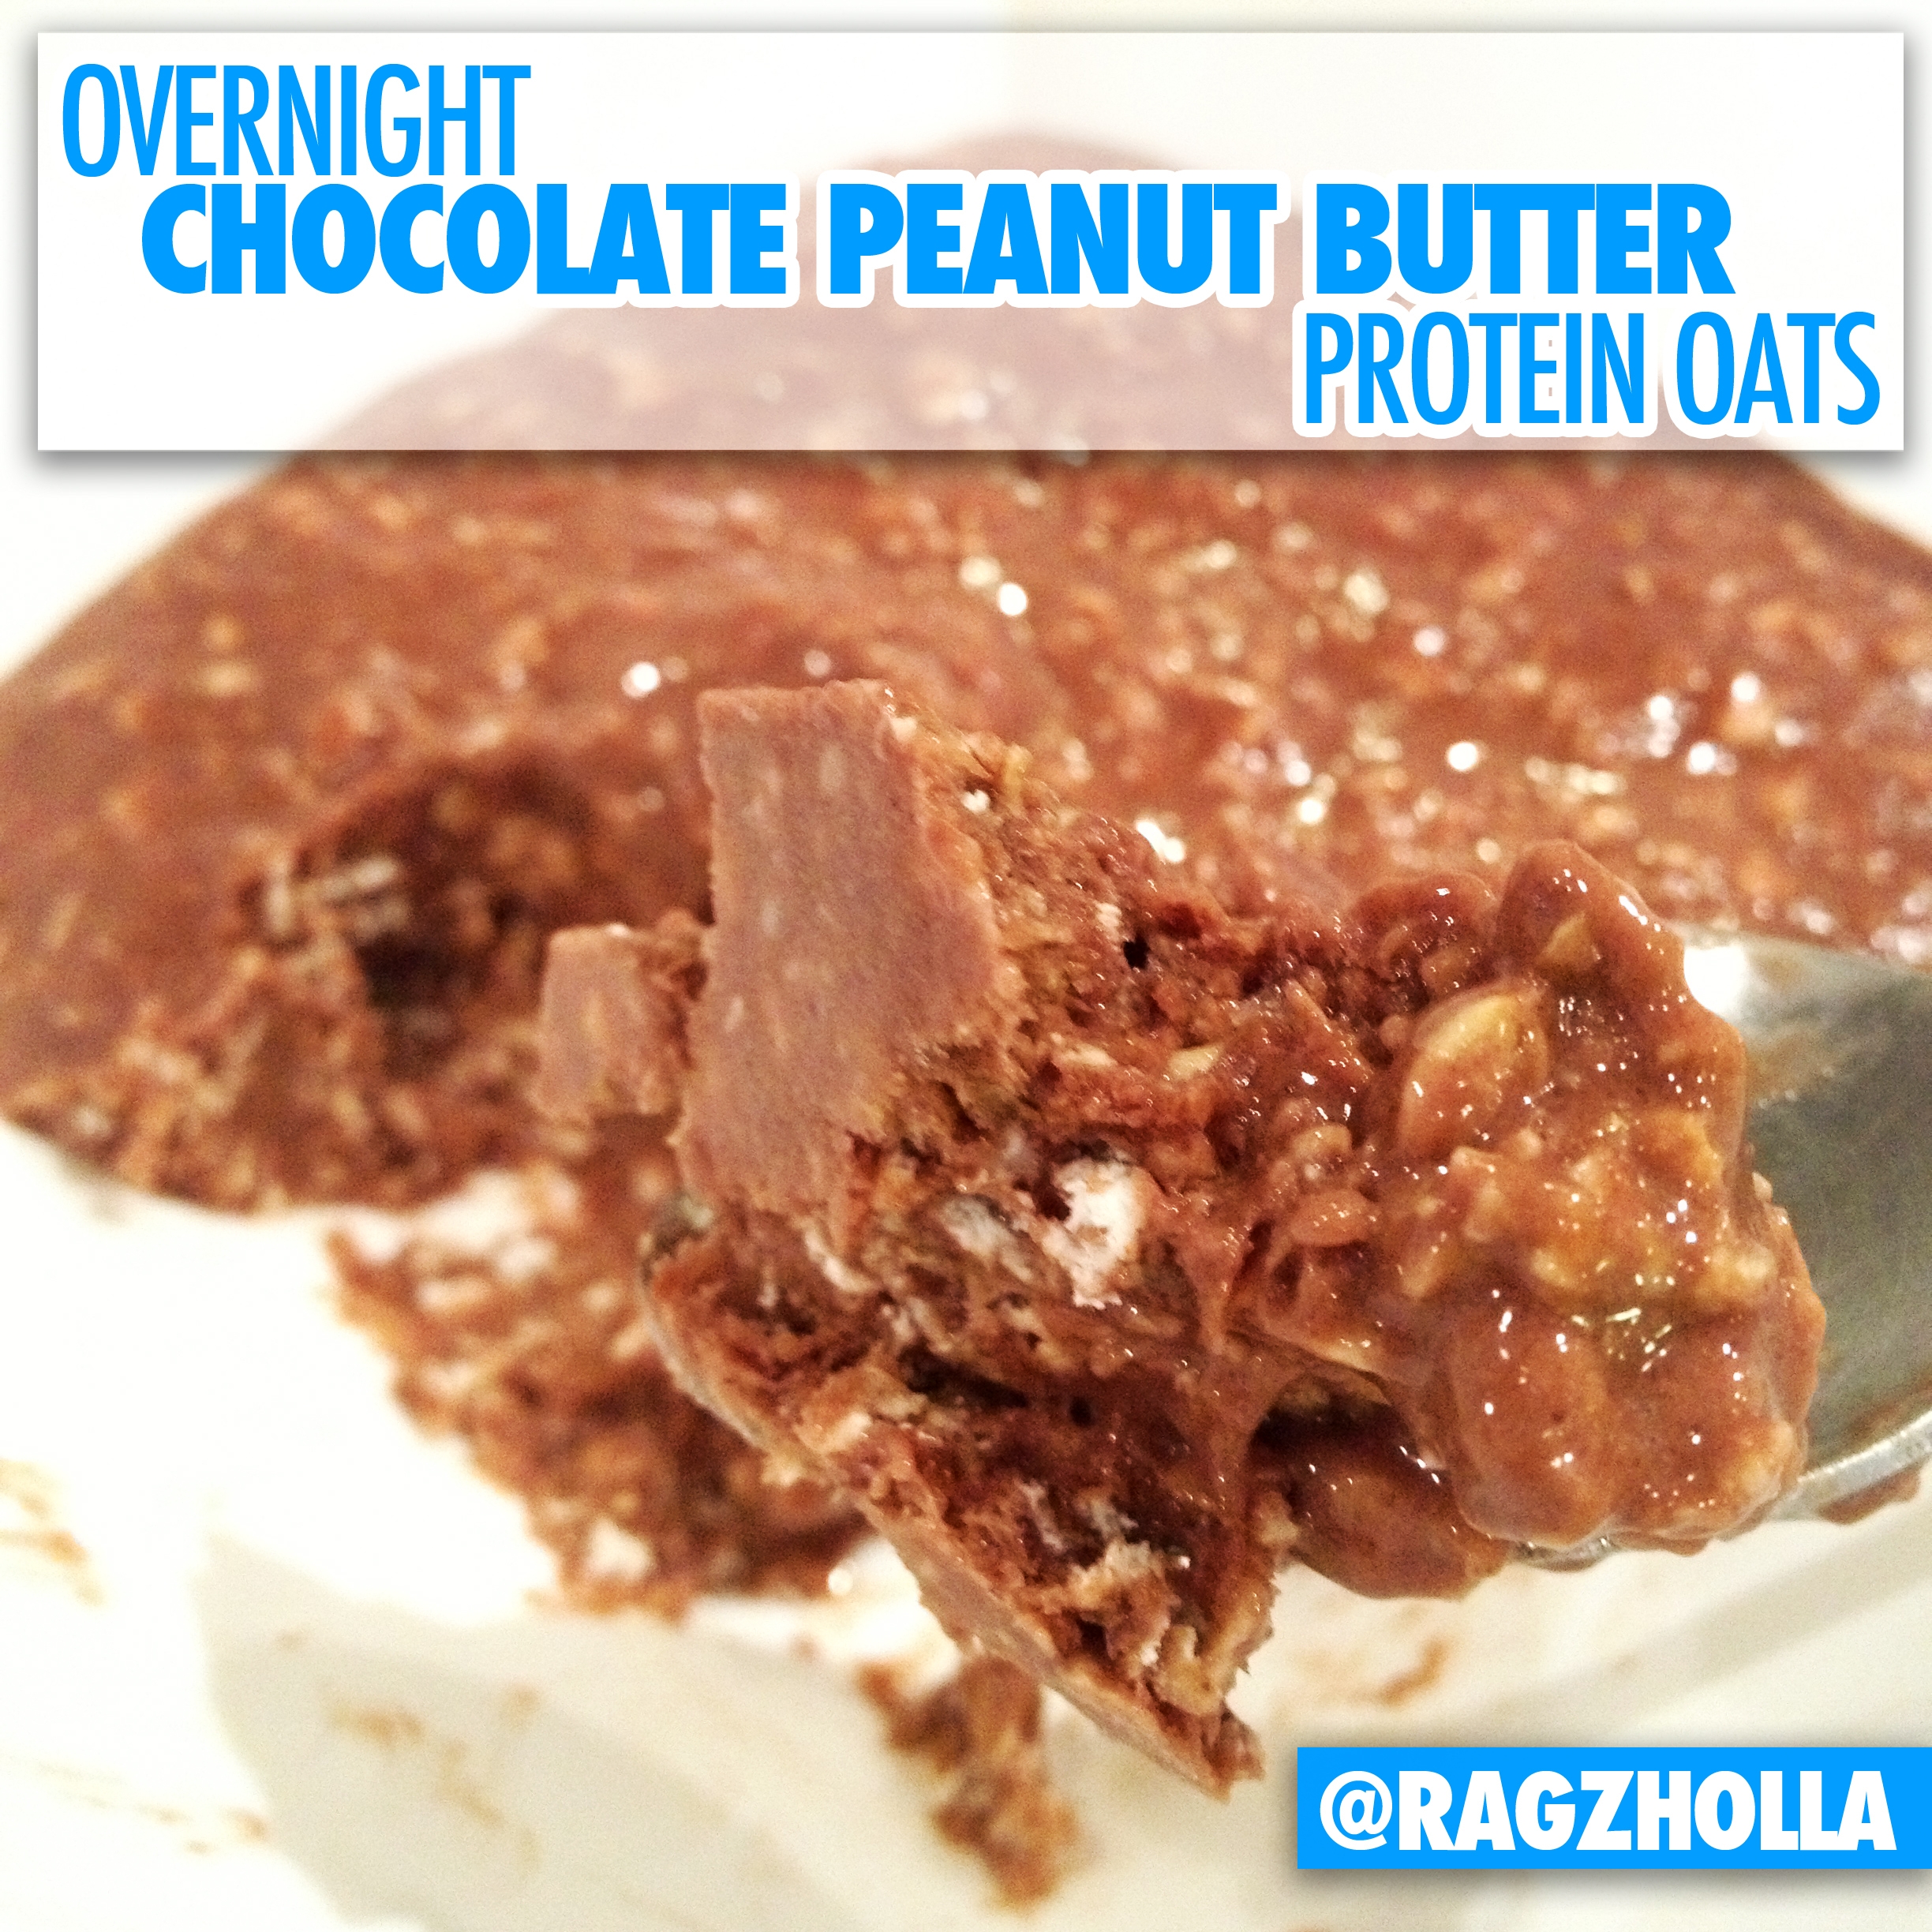 Ripped Recipes - Overnight Chocolate Peanut Butter Protein Oats